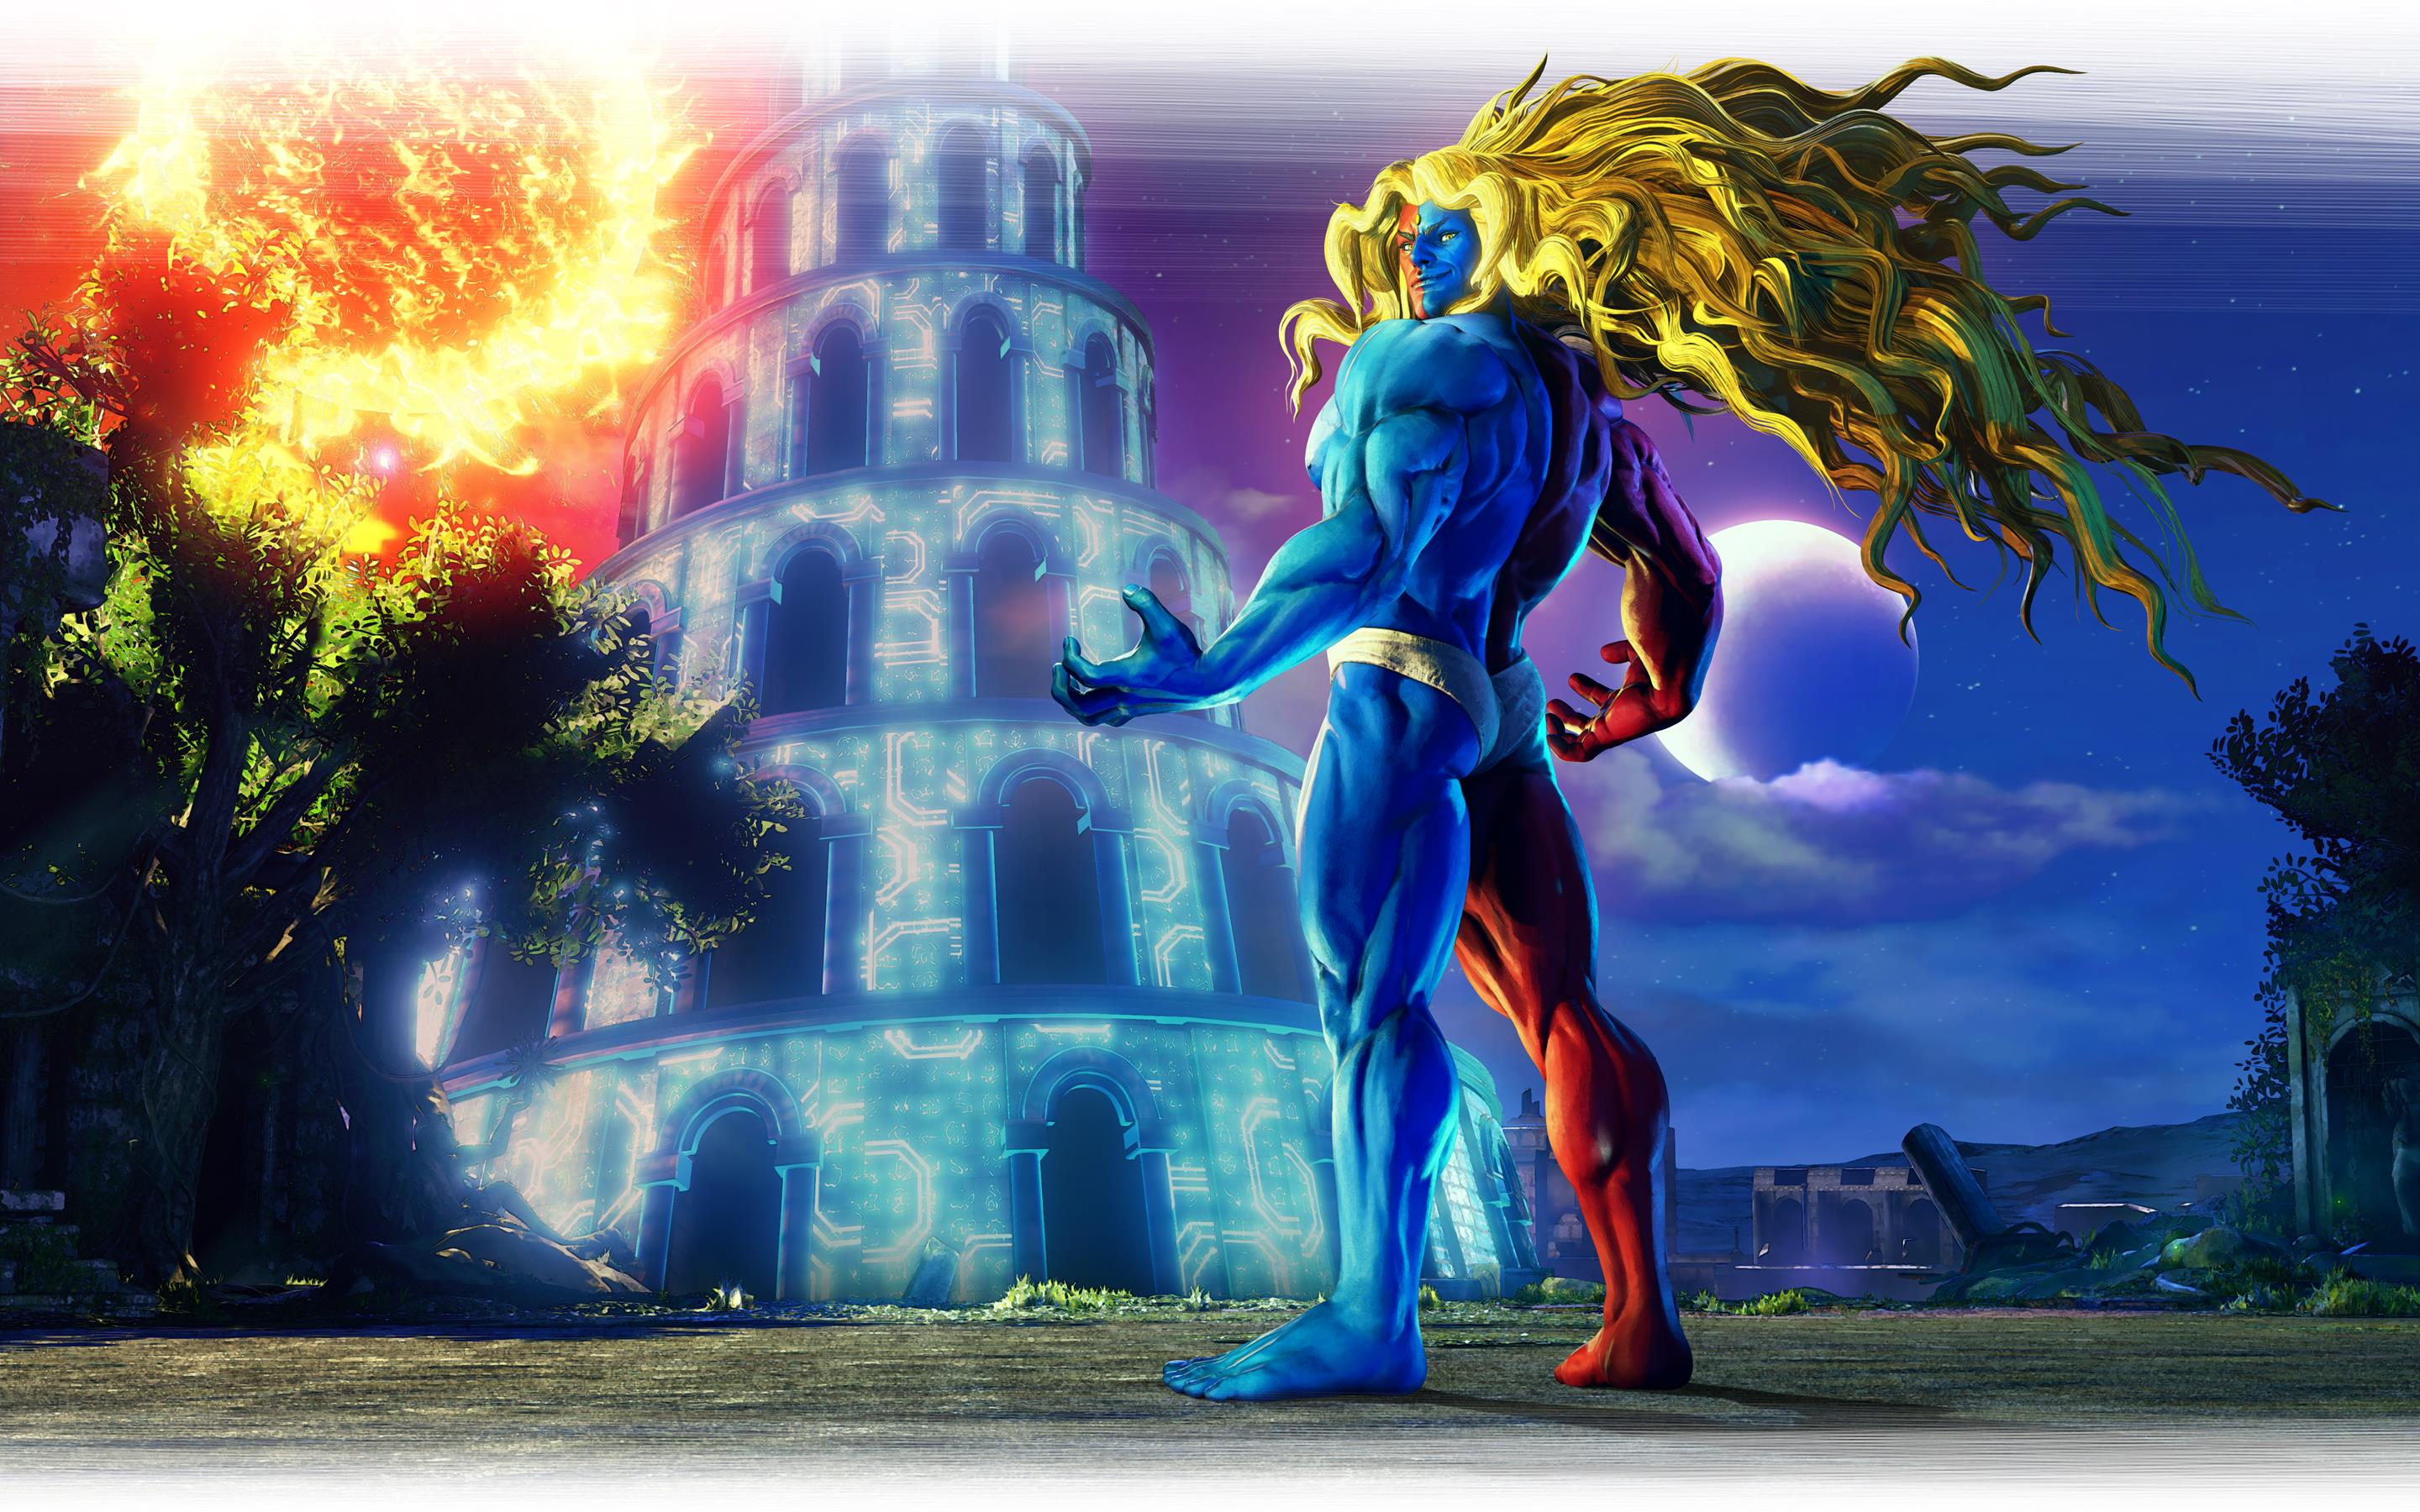 Image for Street Fighter 5 Champion Edition review: one last update to soldifiy SF5 as one of the best fighters this generation